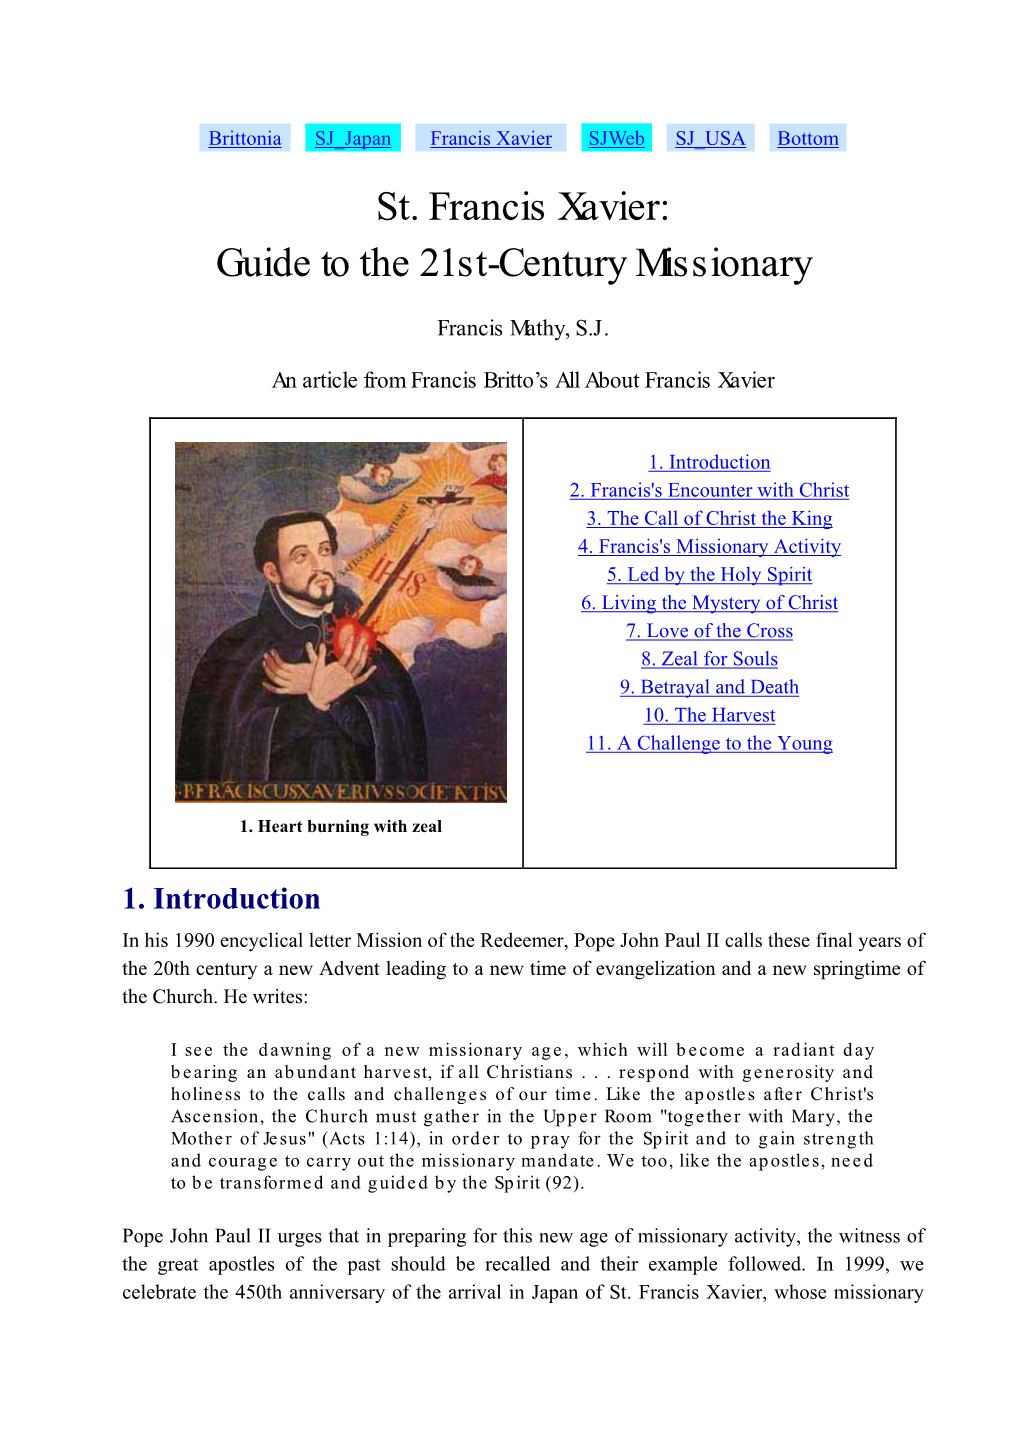 St. Francis Xavier: Guide to the 21St-Century Missionary